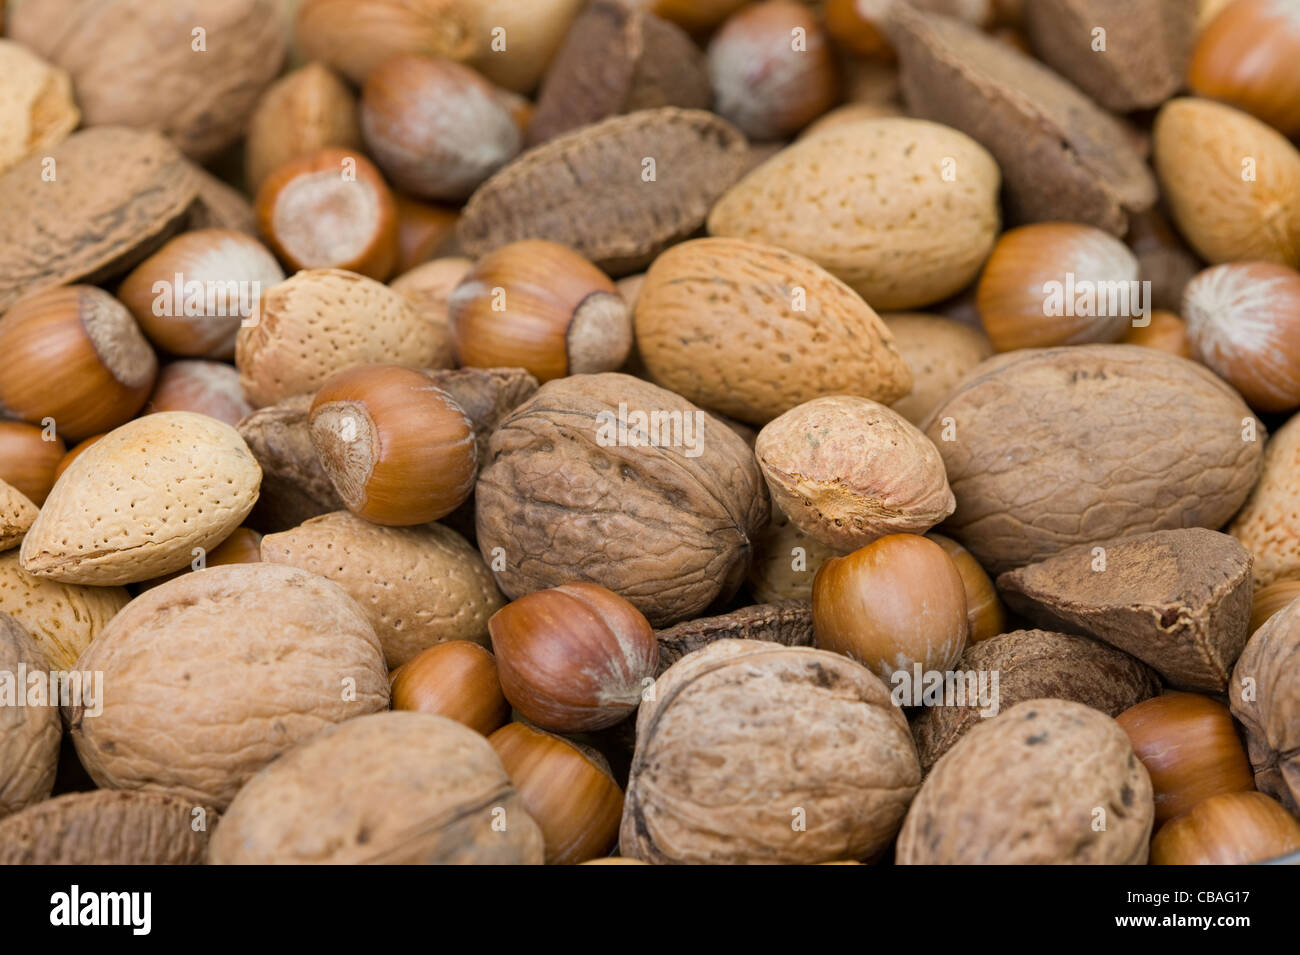 a full frame photograph of mixed whole nuts in their shells including: almond, brazil, walnut, hazel Stock Photo